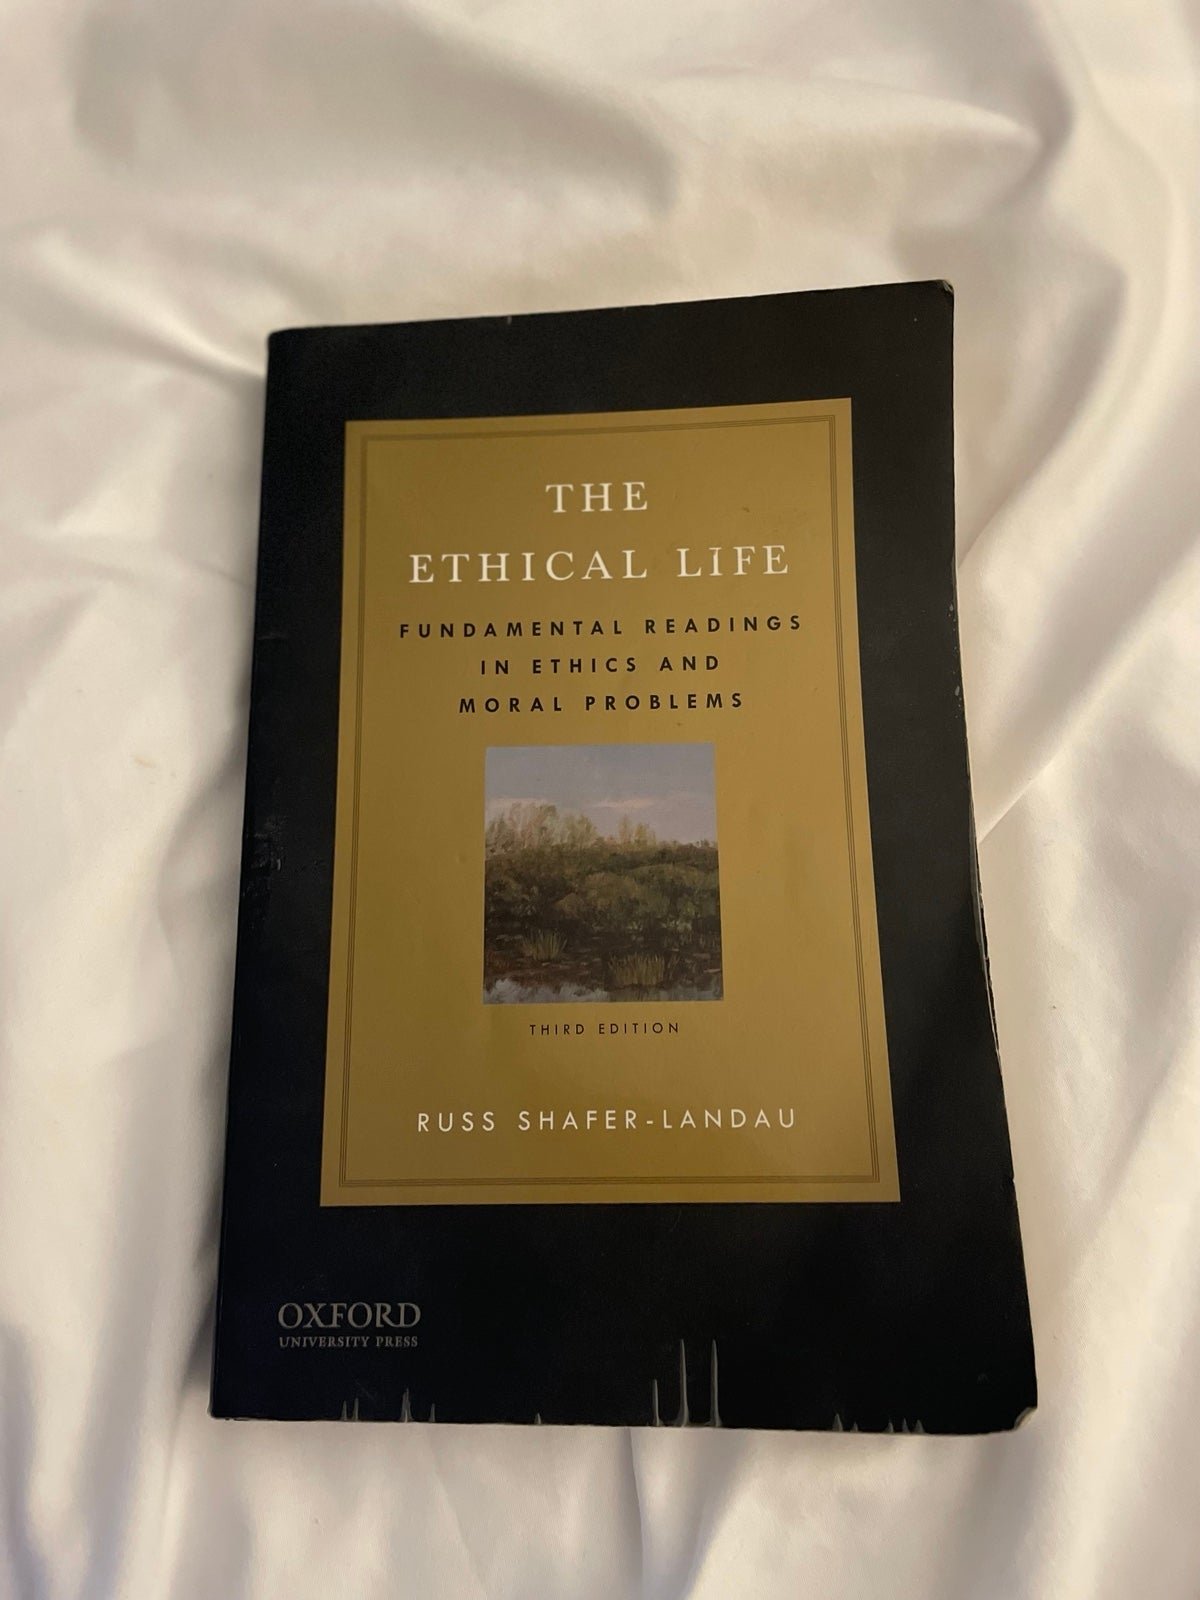 The Ethical Life Fundamental Readings In Ethics And Moral Problems 8V75jmOIL